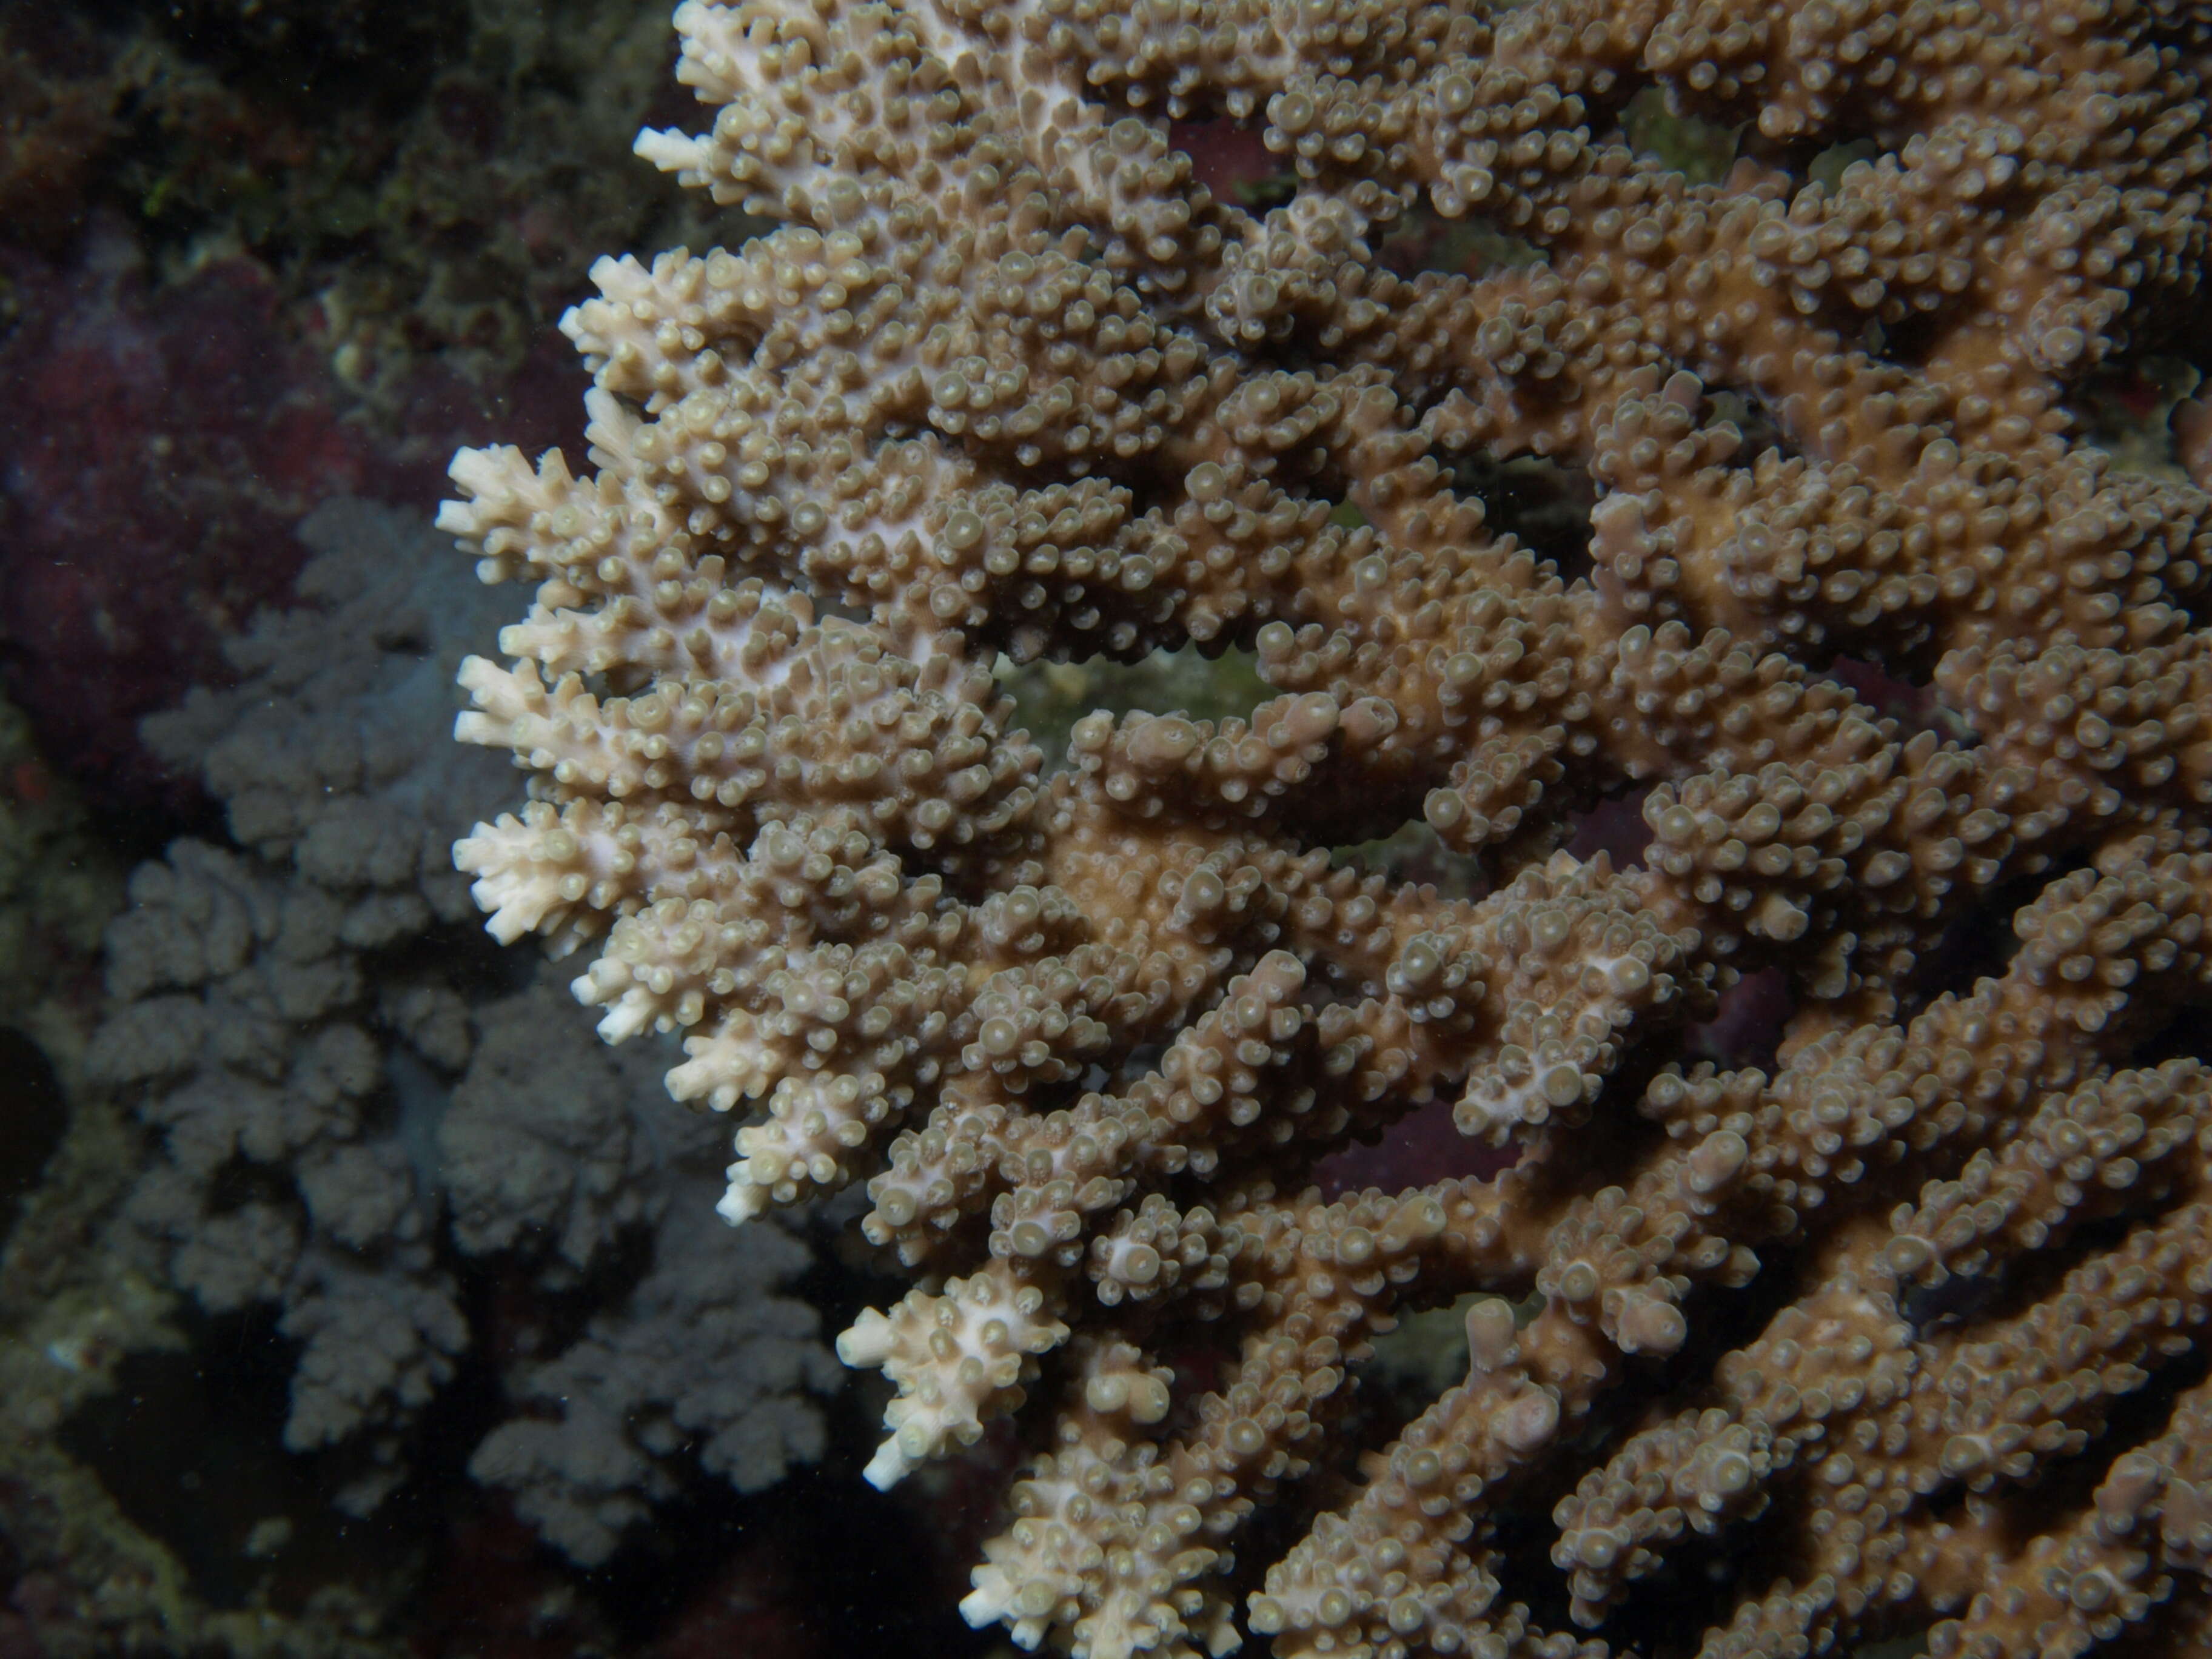 Image of Table coral